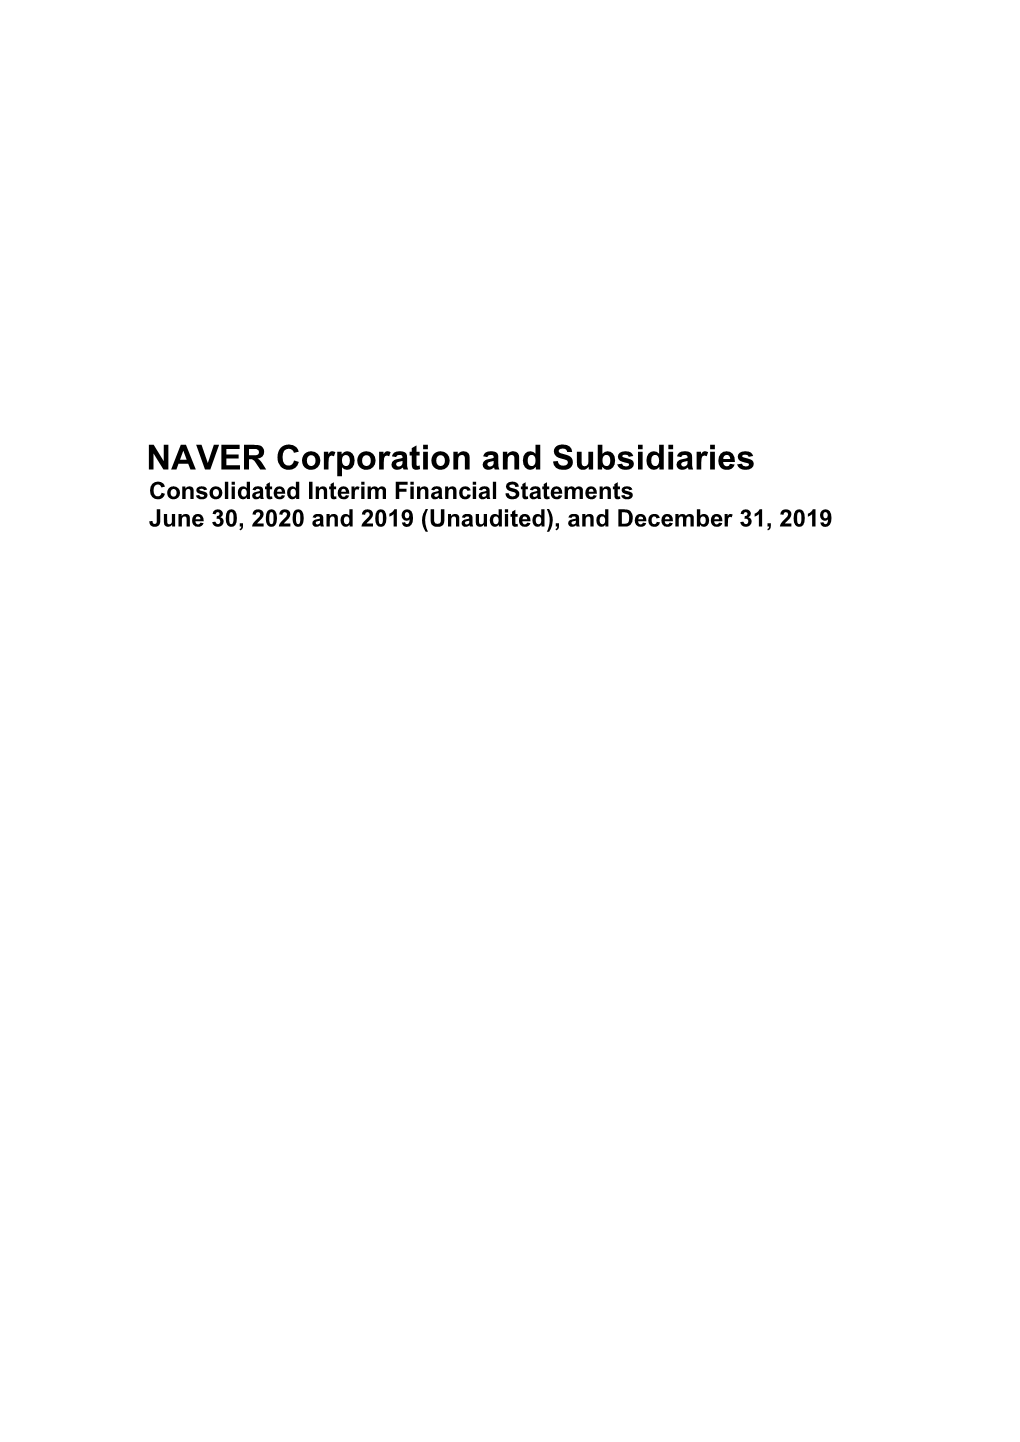 NAVER Corporation and Subsidiaries Consolidated Interim Financial Statements June 30, 2020 and 2019 (Unaudited), and December 31, 2019